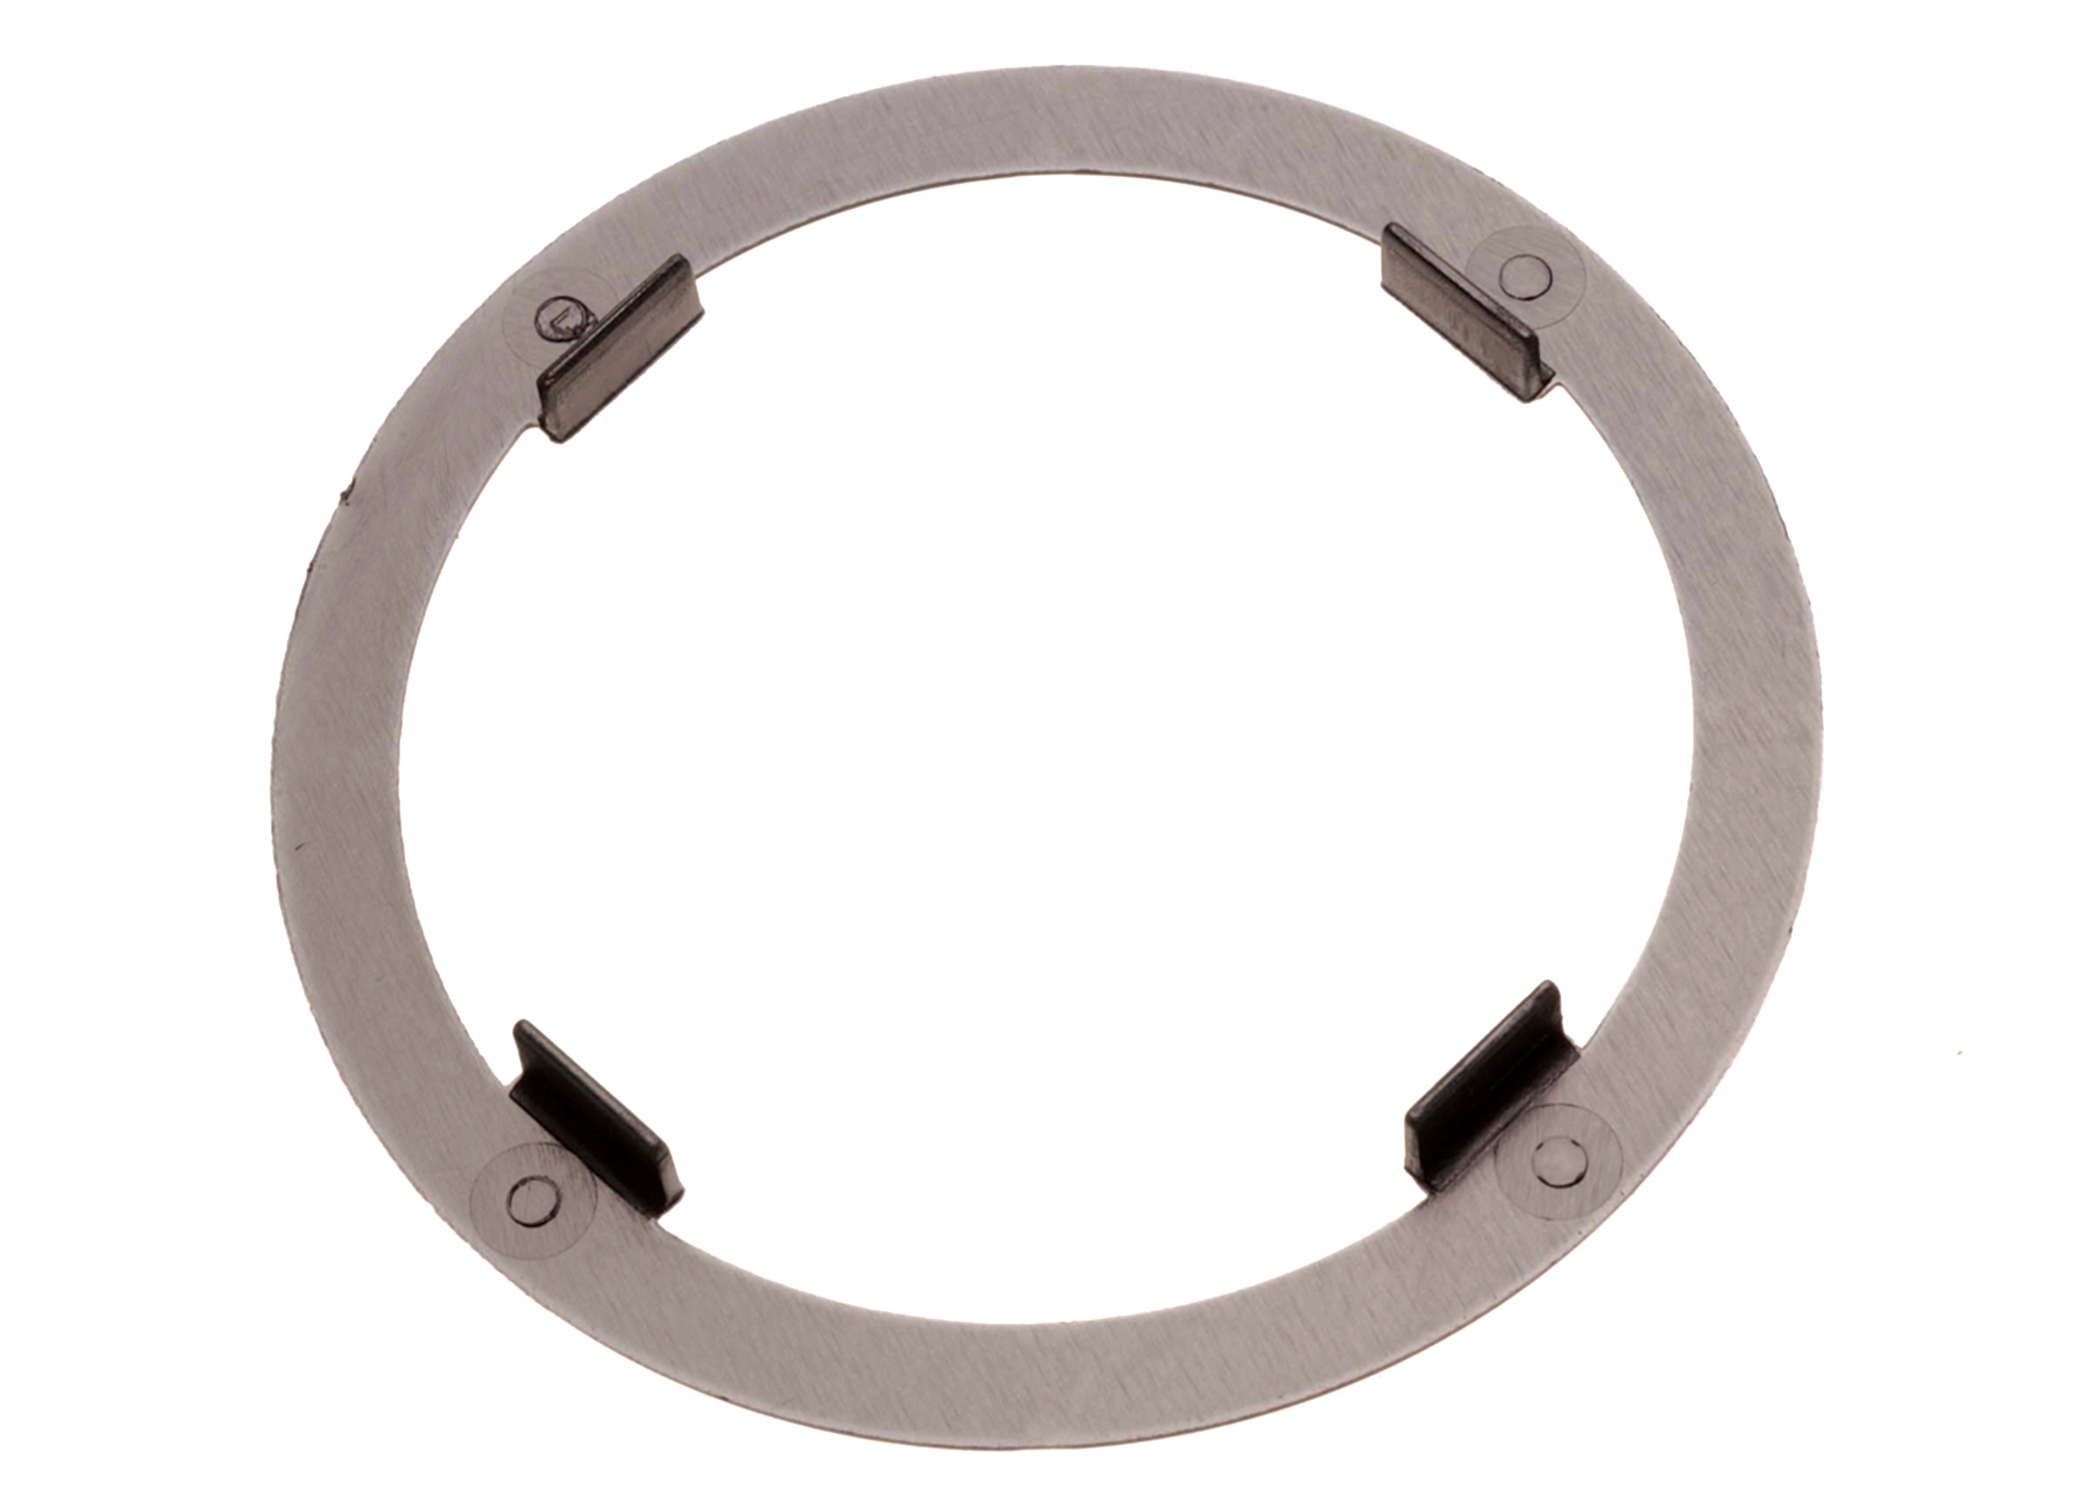 GM GENUINE PARTS - Automatic Transmission Reaction Sun Gear Shell Thrust Washer - GMP 8642331